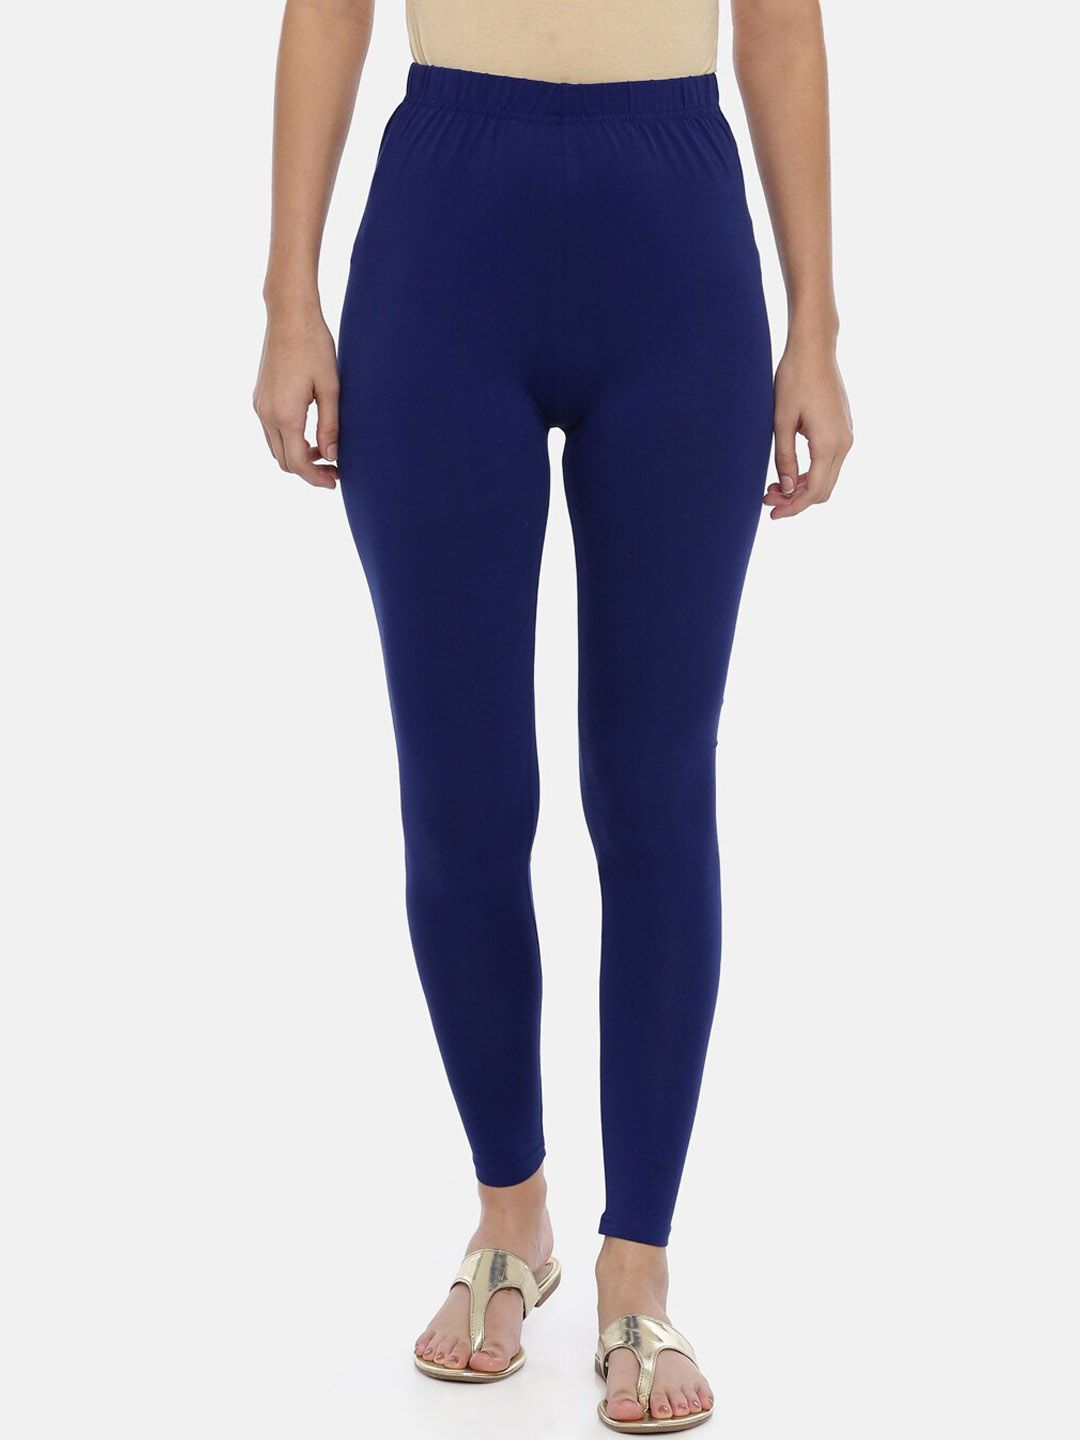 Souchii Women Navy Blue Solid Slim-Fit Ankle-Length Leggings Price in India